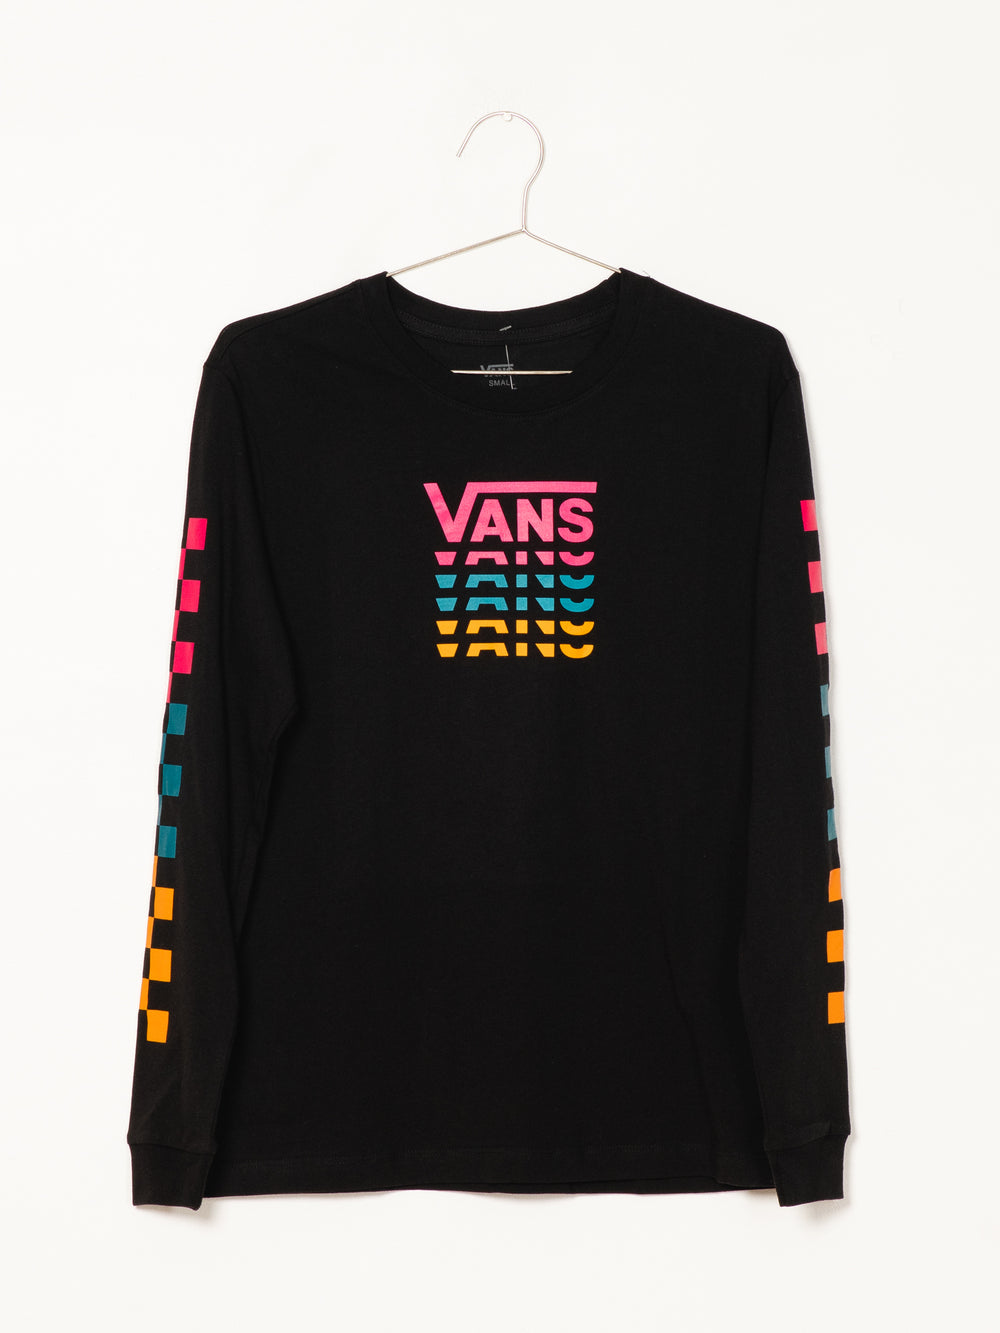 WOMENS WORD CHECK L/S TEE - BLACK - CLEARANCE